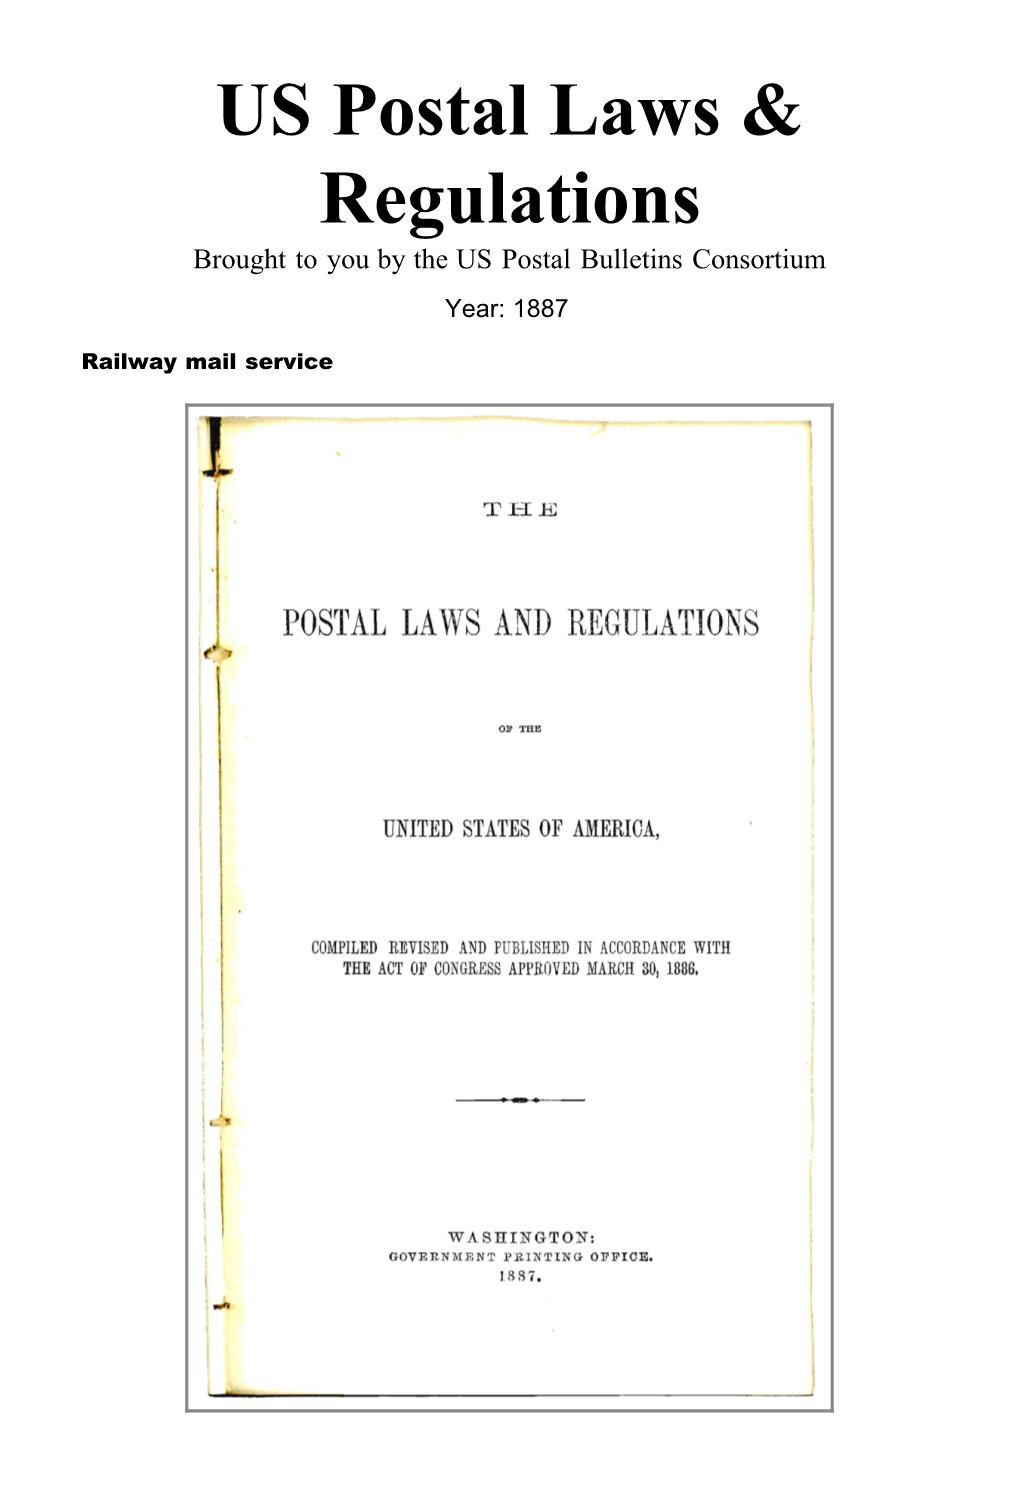 Railway Mail Service Table of Contents